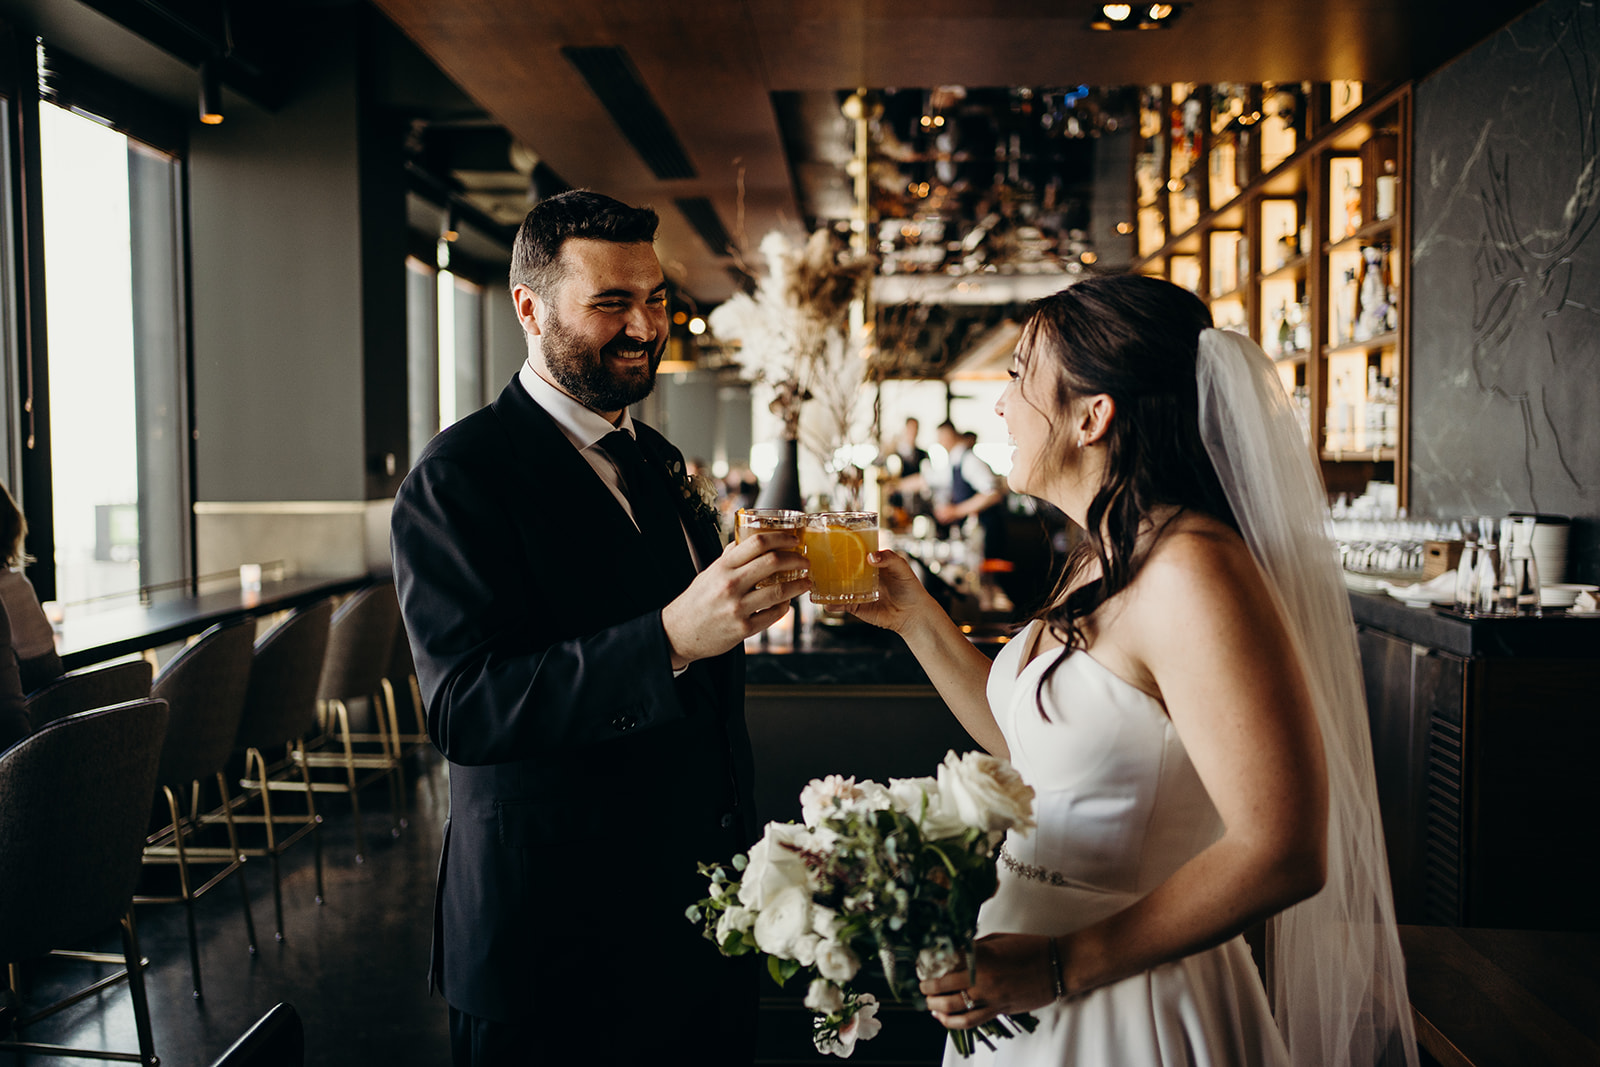 Man and wife holding drinks together looking at each other.